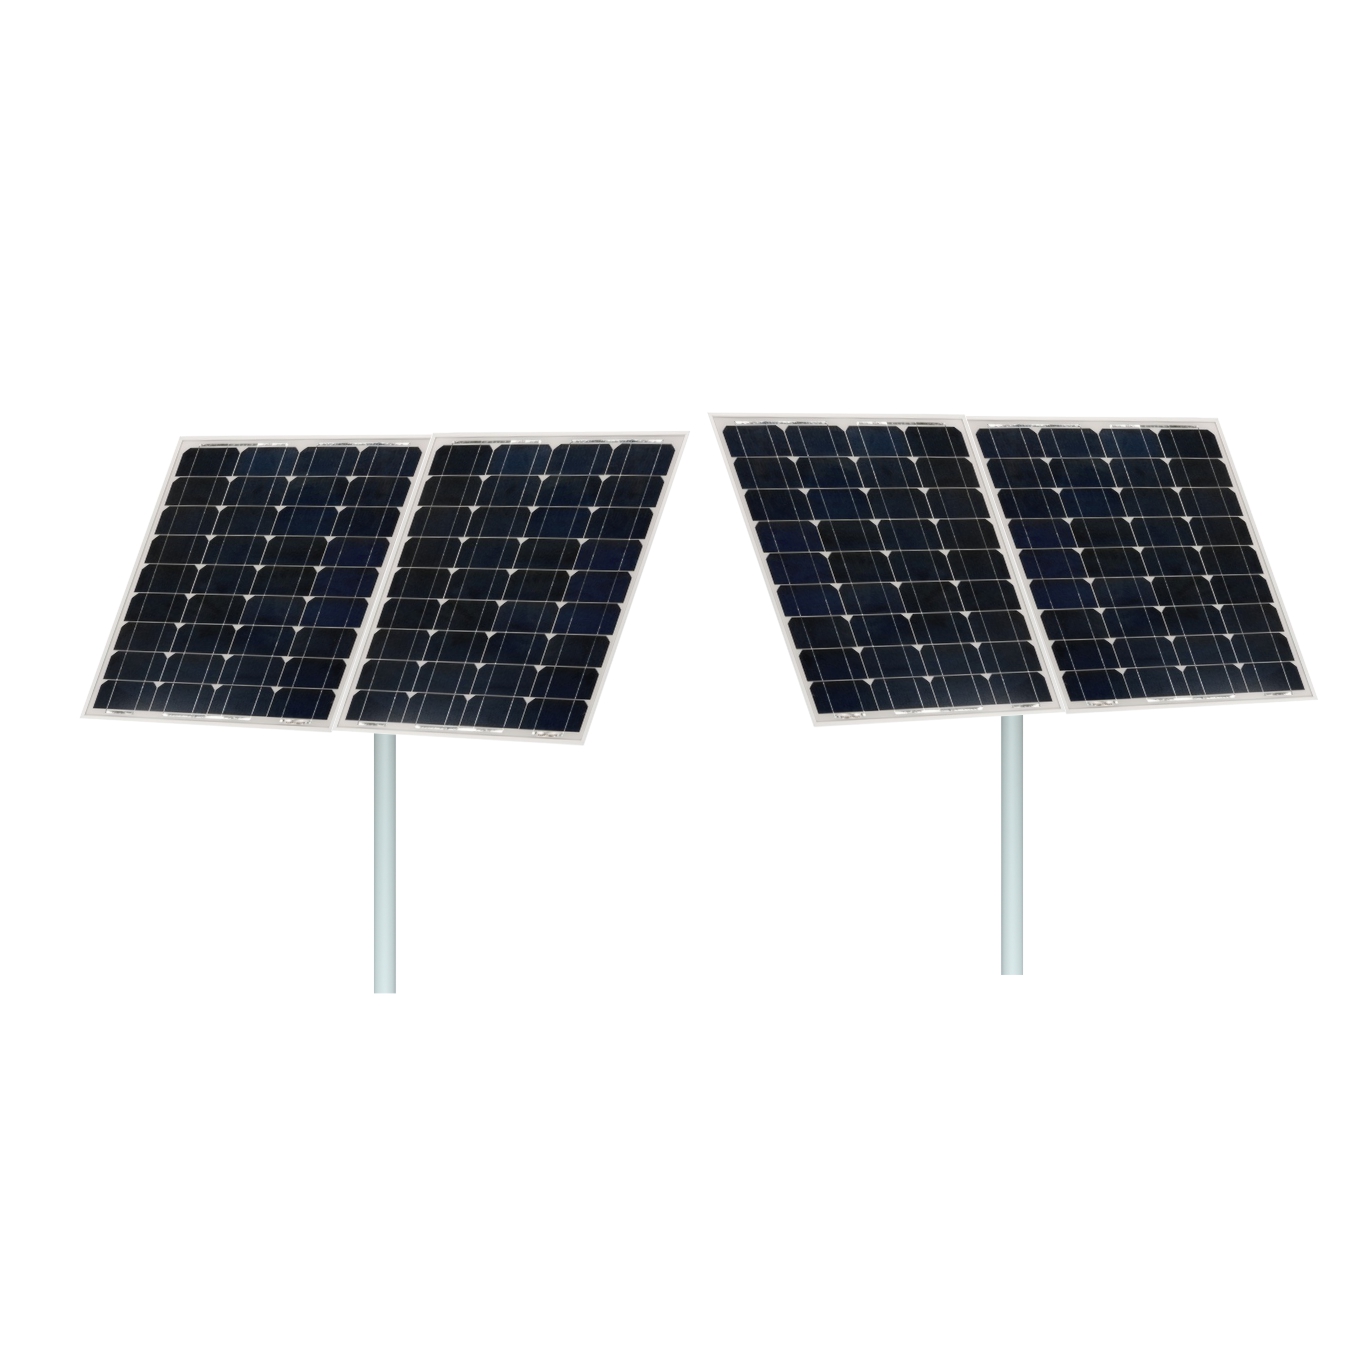 two 24v solar panels with post